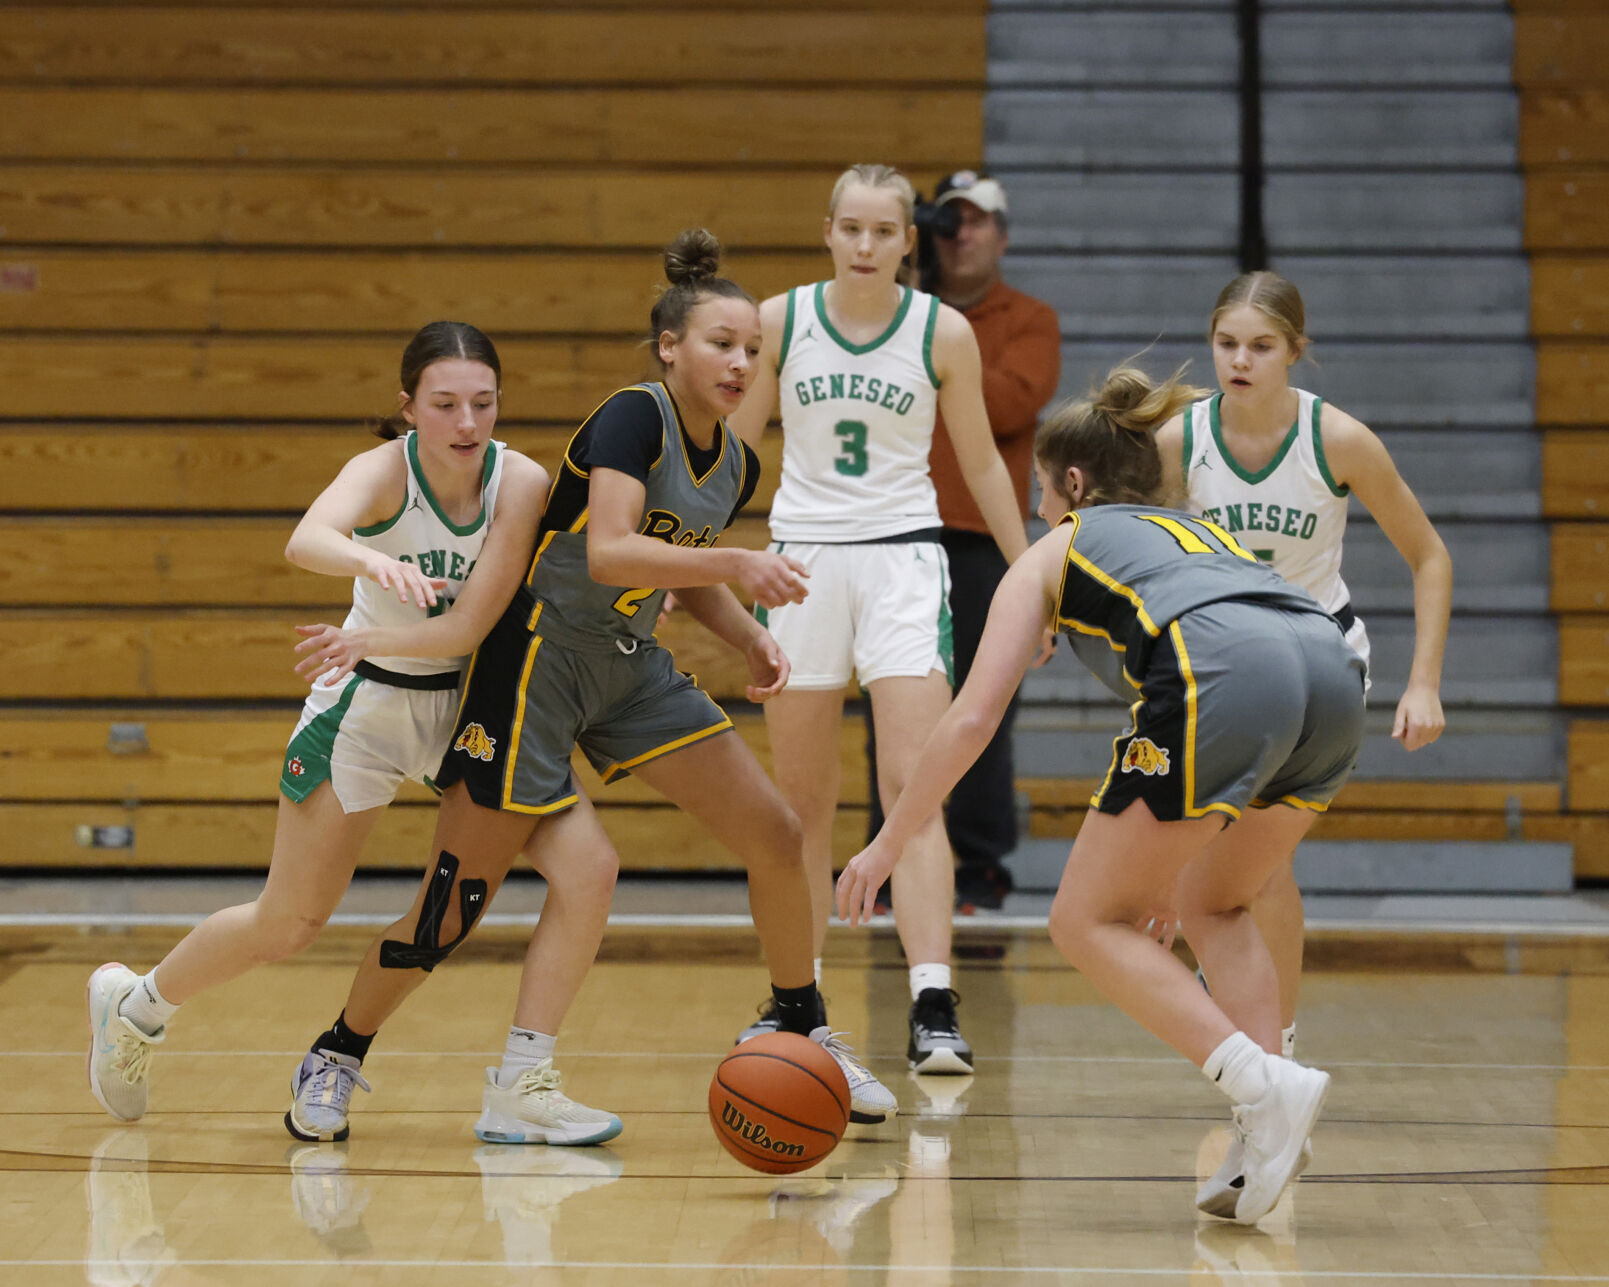 Bettendorf Bulldogs Dominate Geneseo with Game-High 19-Point Performance